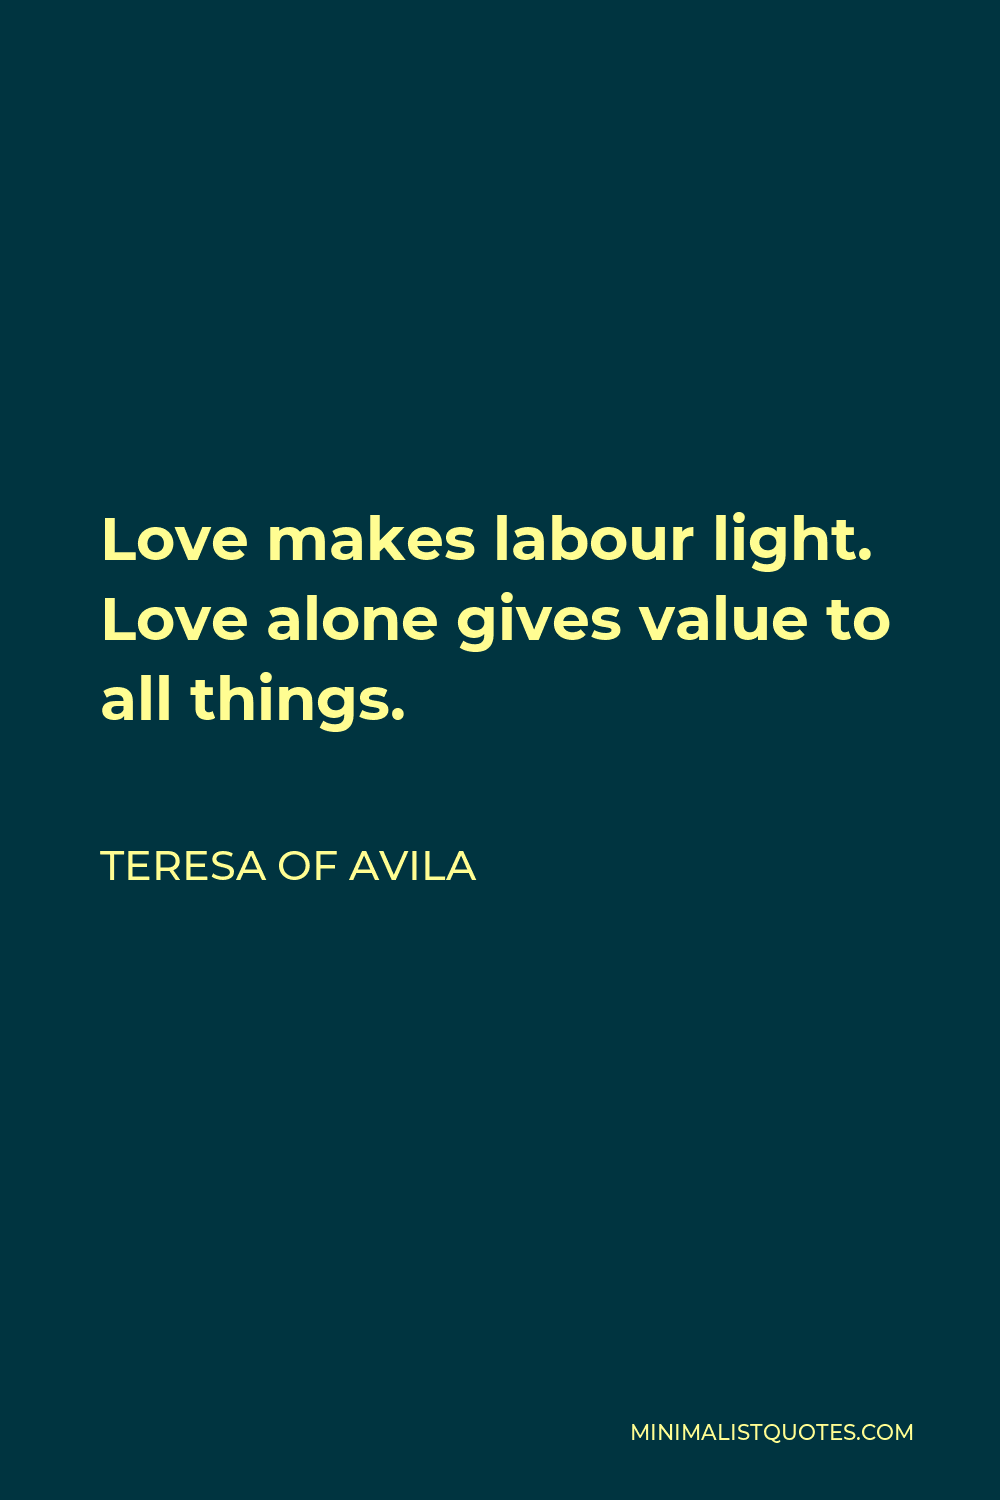 Teresa of Avila Quote - Love makes labour light. Love alone gives value to all things.